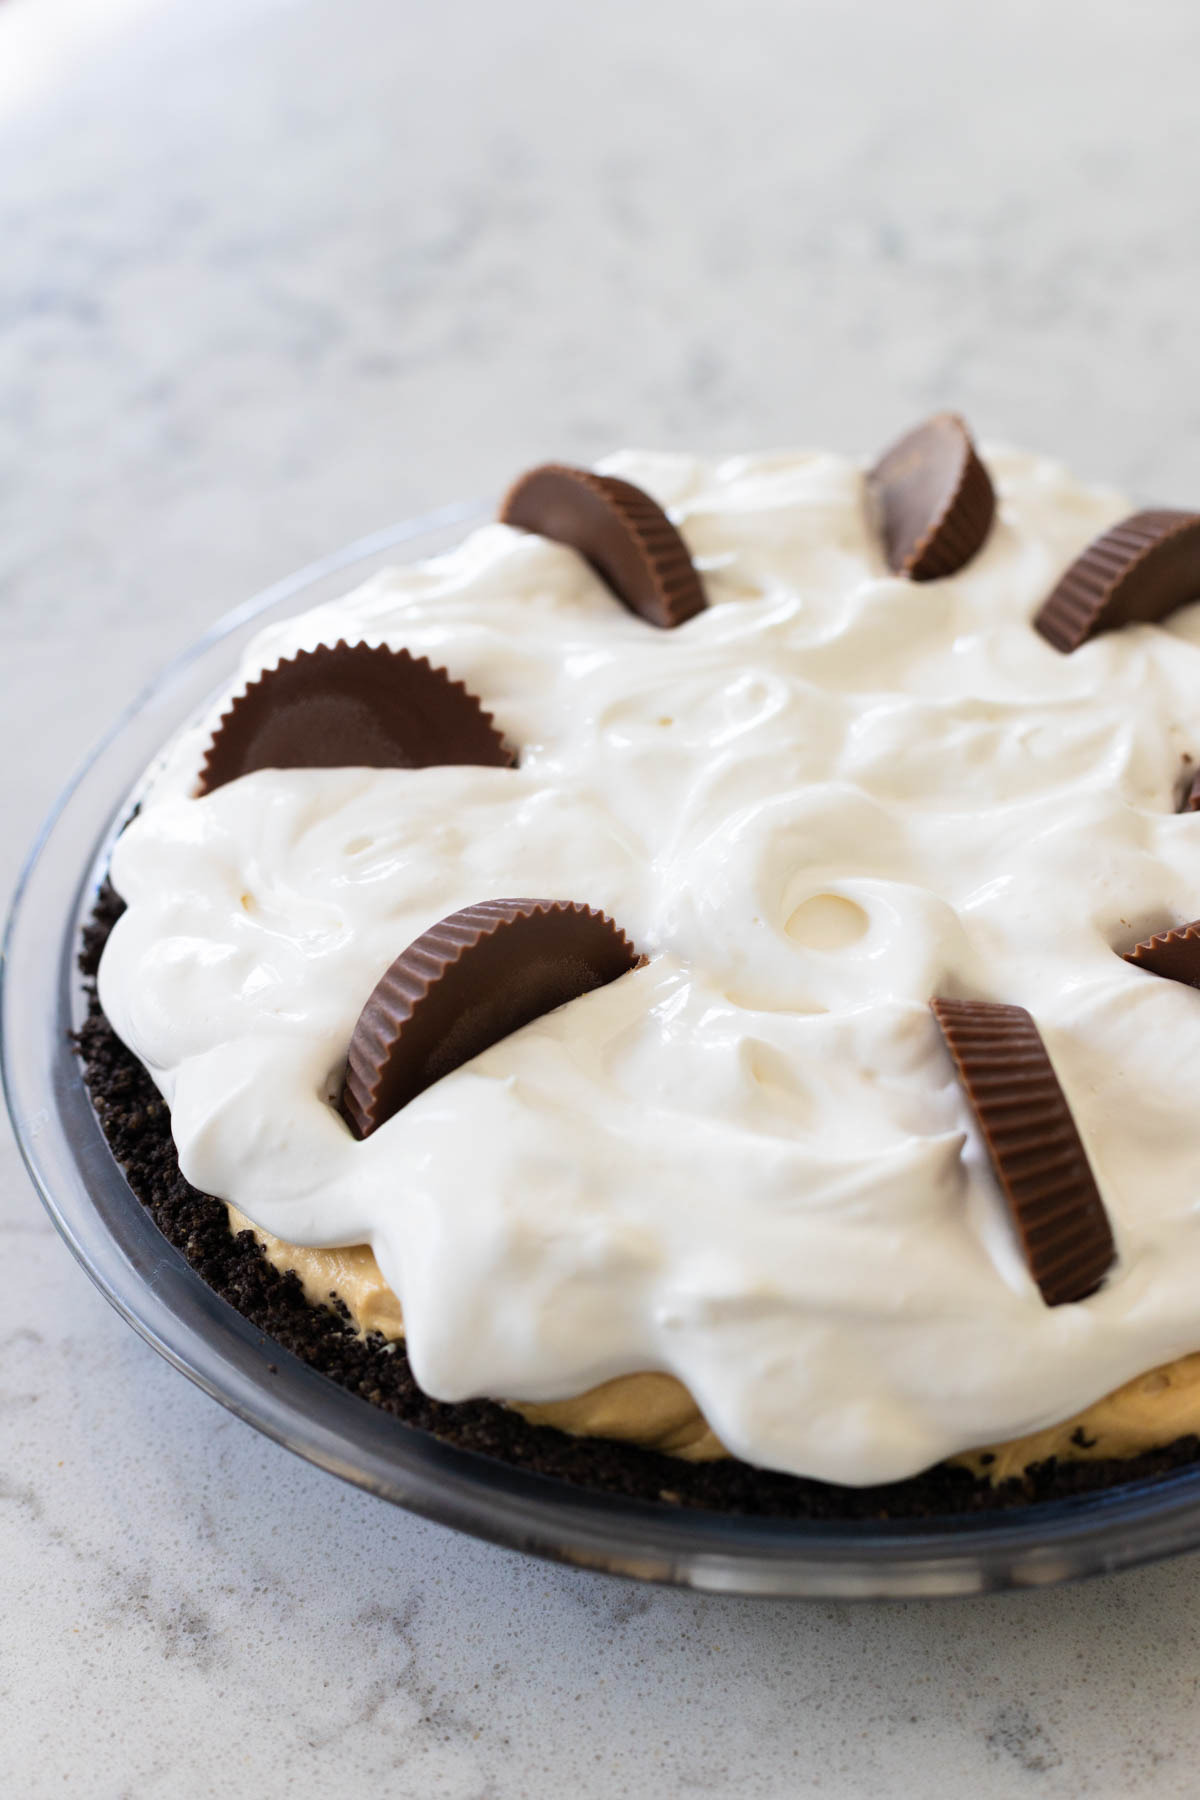 The sliced Reese's peanut butter cups have been added to the top of the pie for decoration.